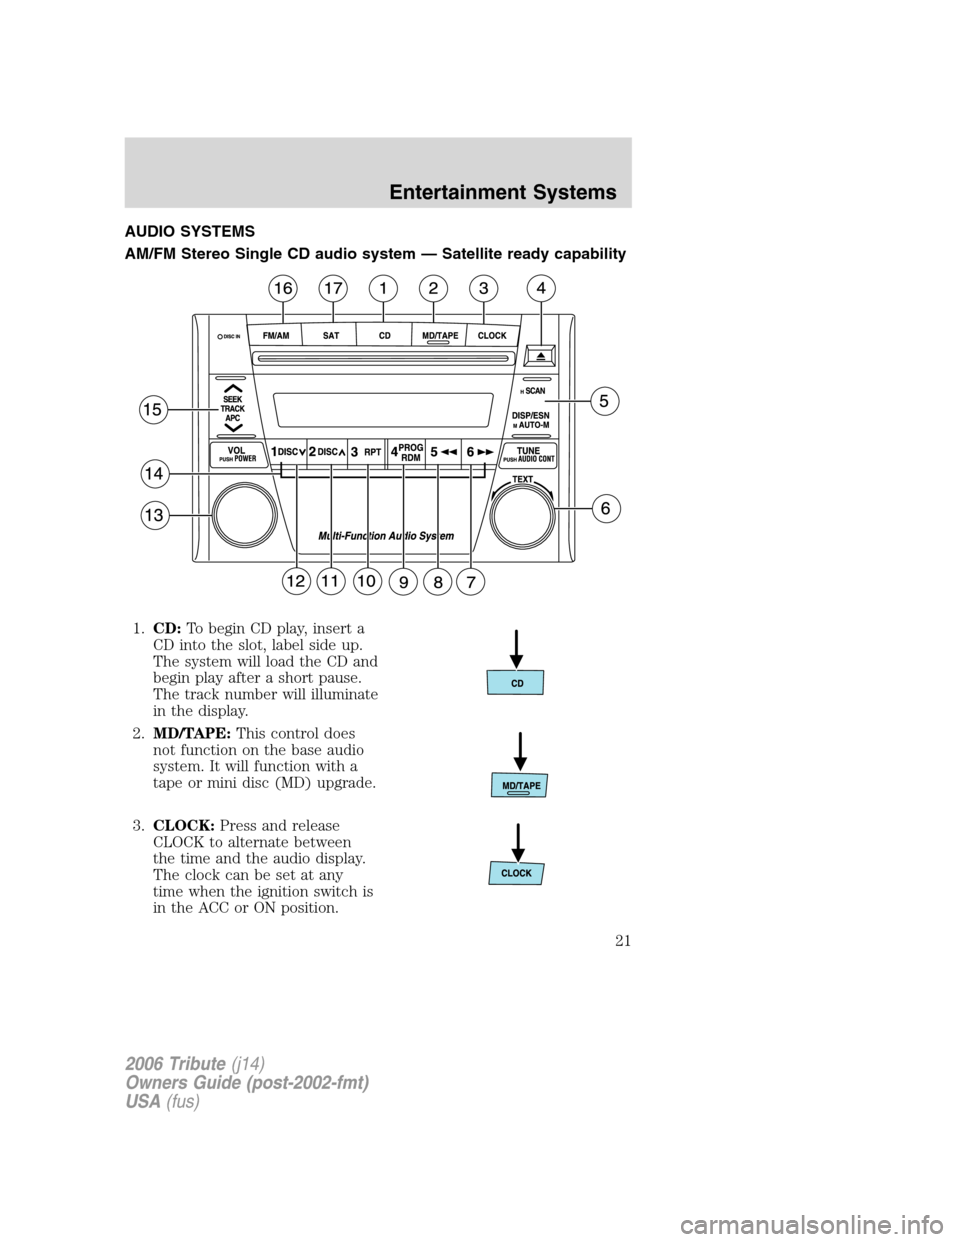 MAZDA MODEL TRIBUTE 2006  Owners Manual (in English) AUDIO SYSTEMS
AM/FM Stereo Single CD audio system — Satellite ready capability
1.CD:To begin CD play, insert a
CD into the slot, label side up.
The system will load the CD and
begin play after a sho